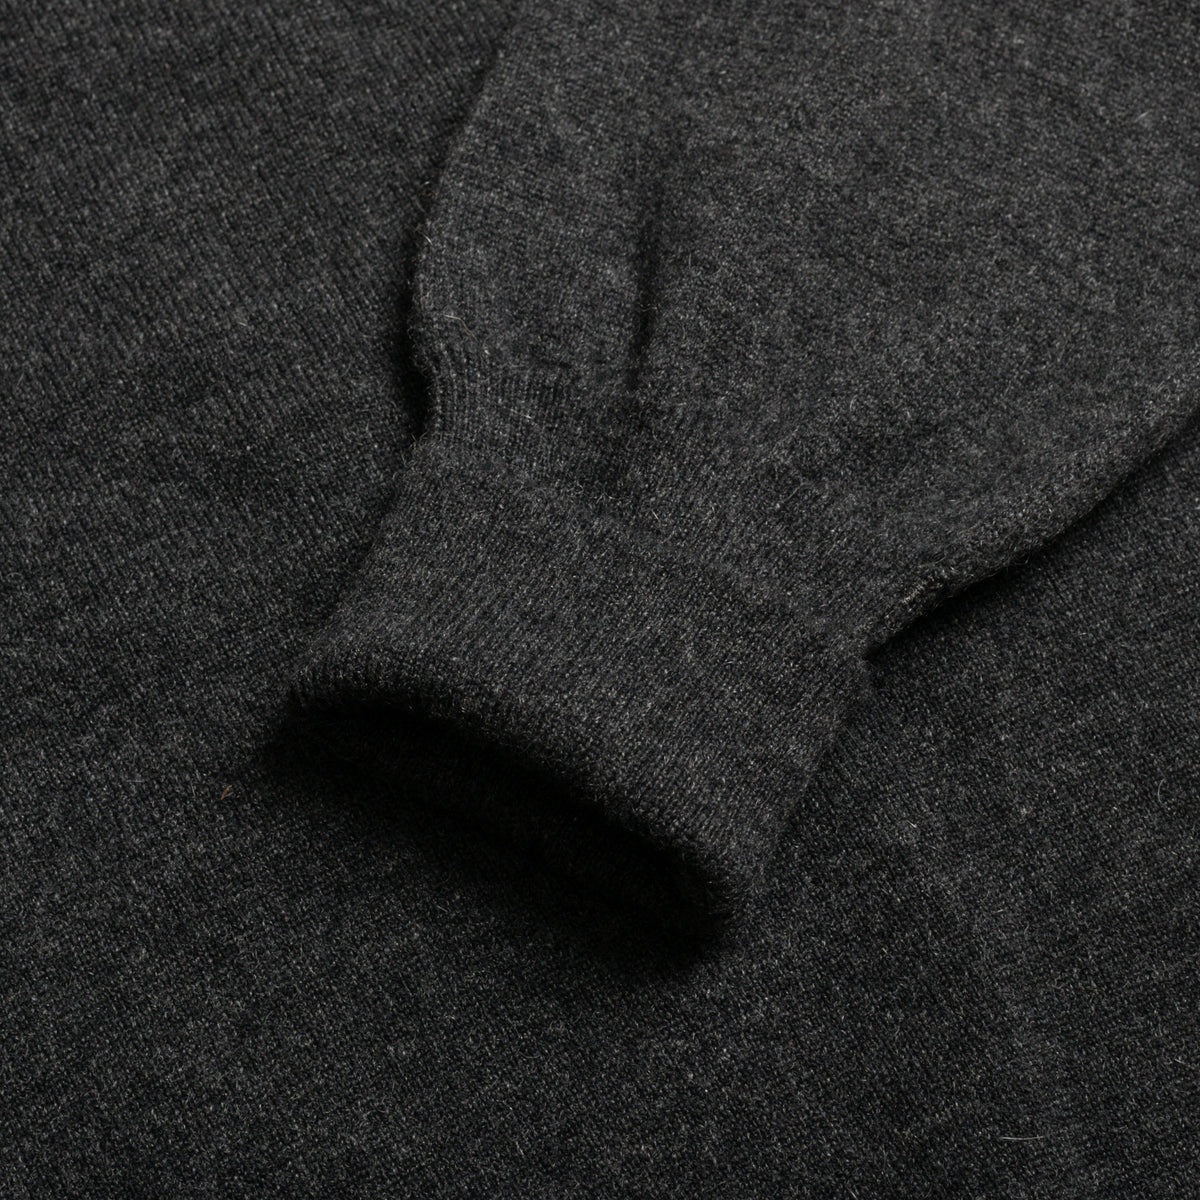 Charcoal Grey 1 Ply Cashmere Sportshirt